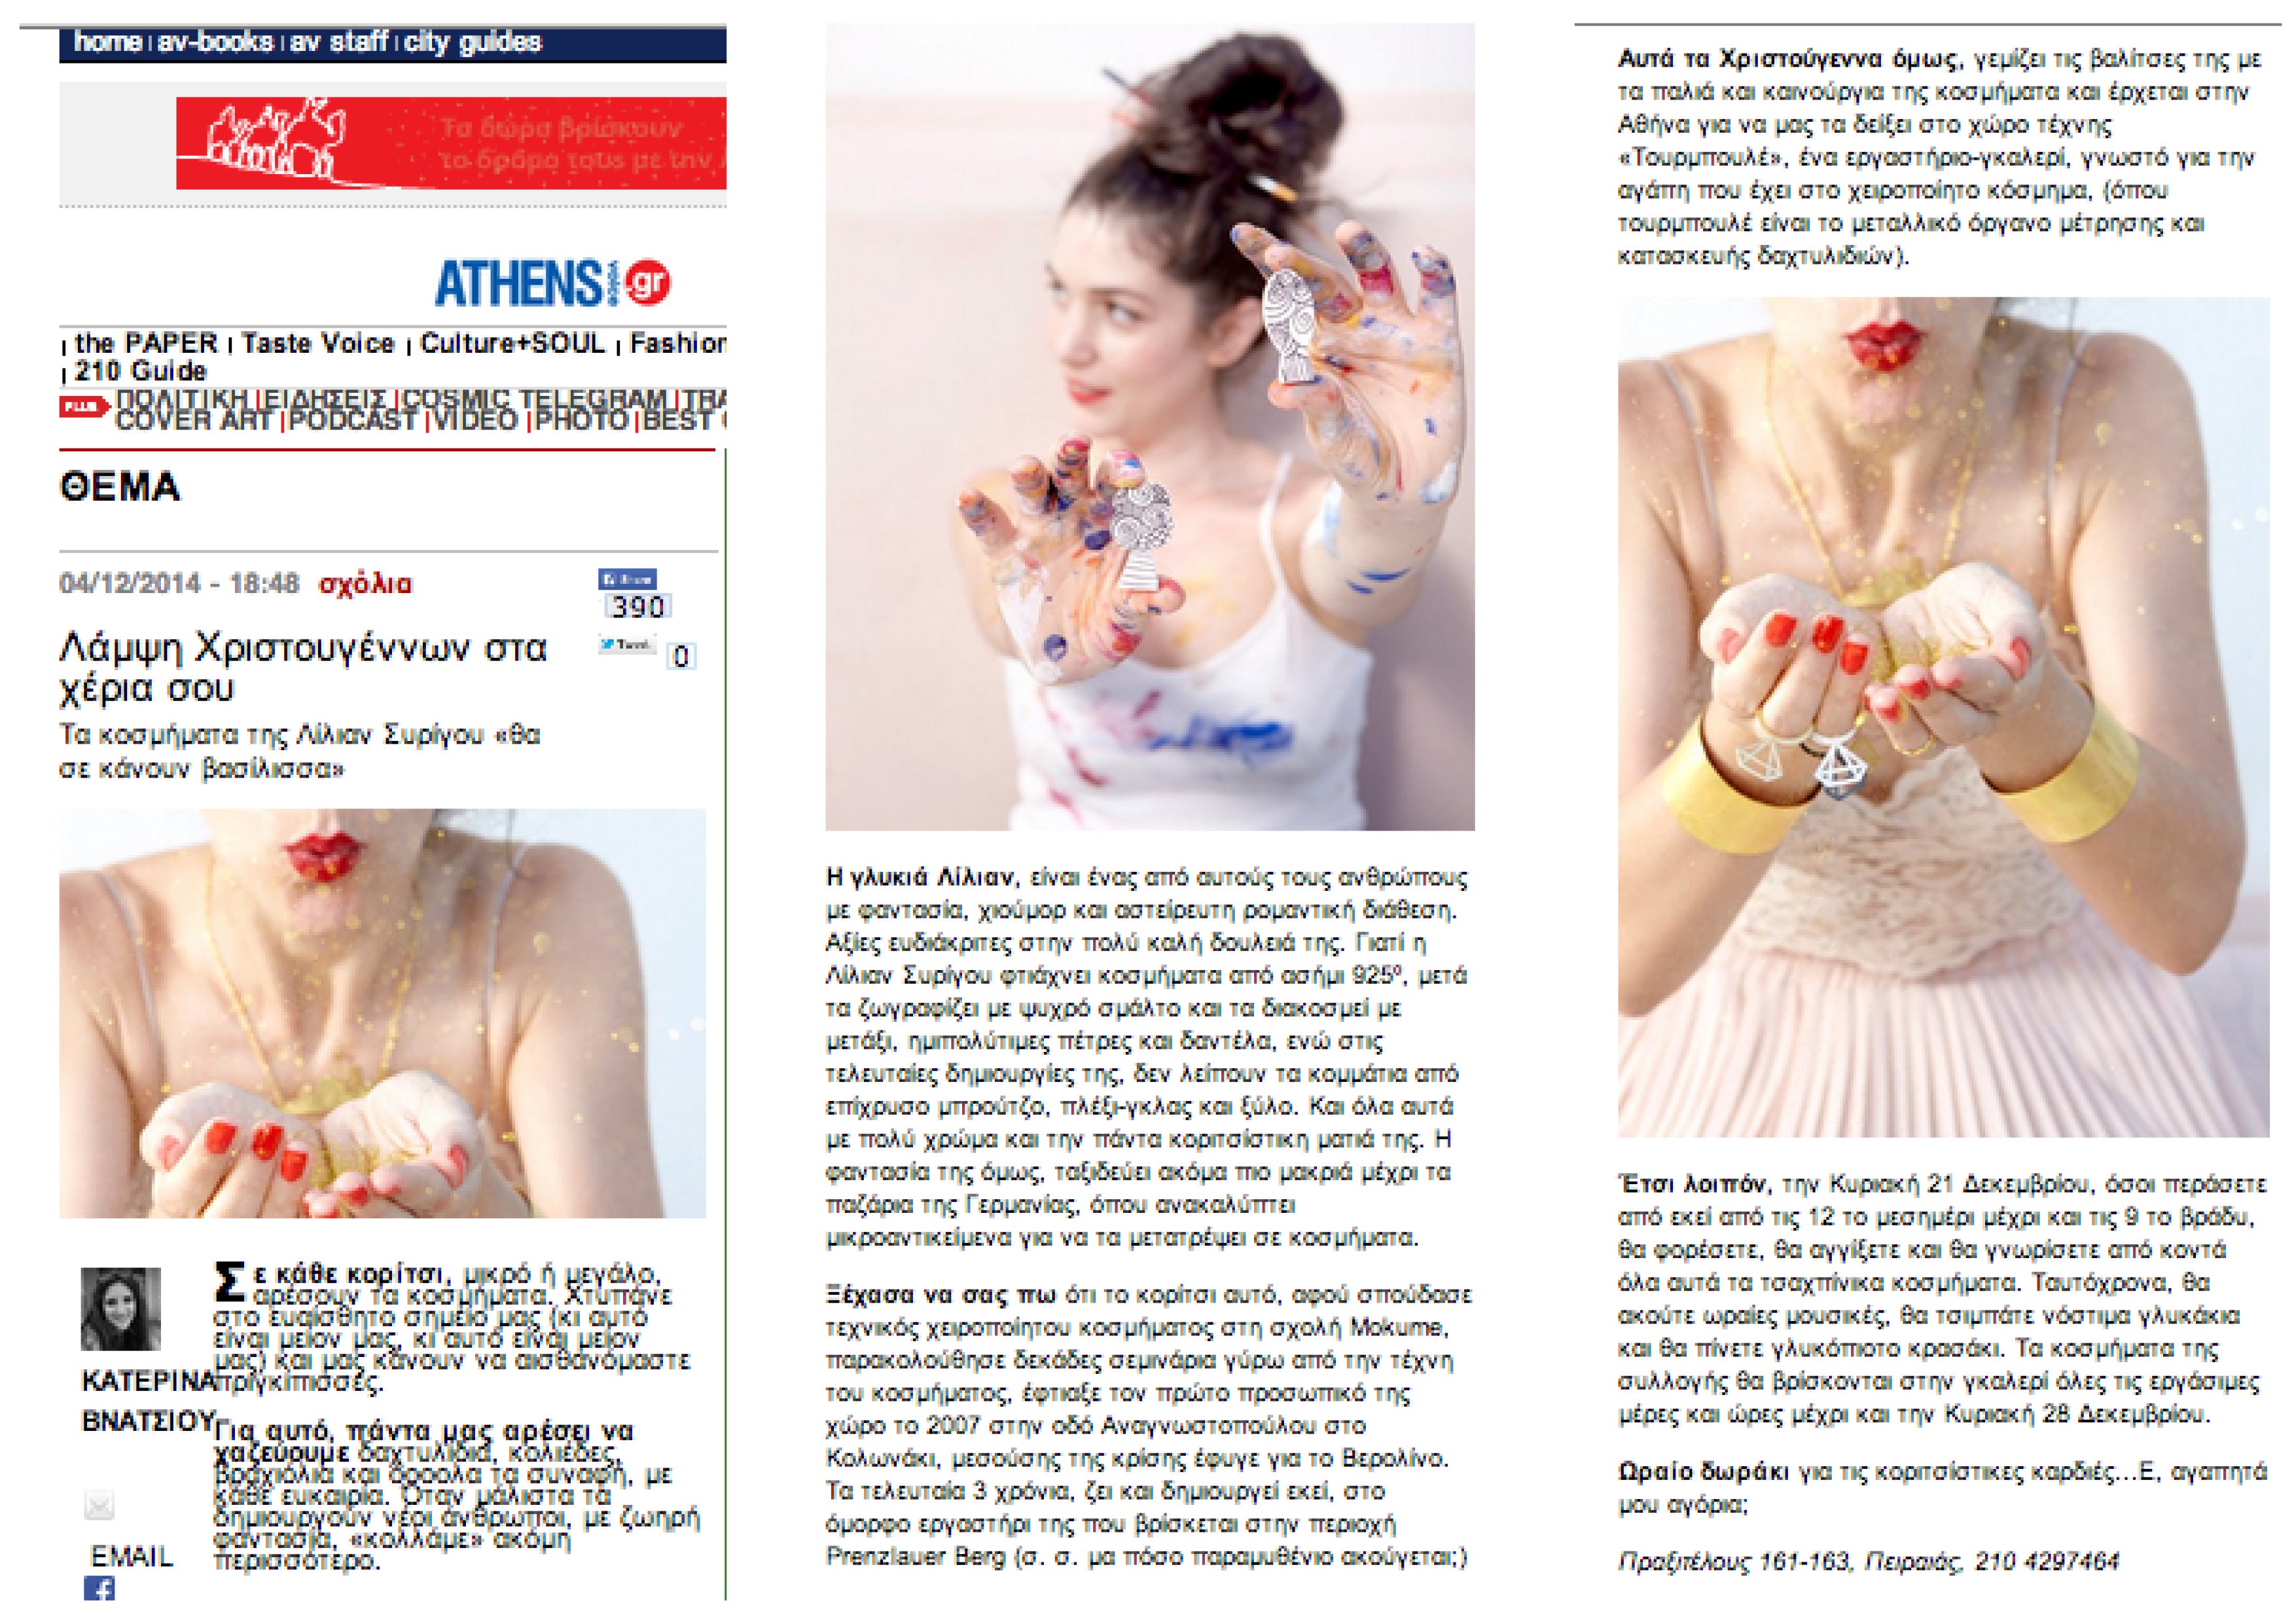 Article at Athens Voice Newspaper about “Glitter on Sunday" Jewellery Presentation